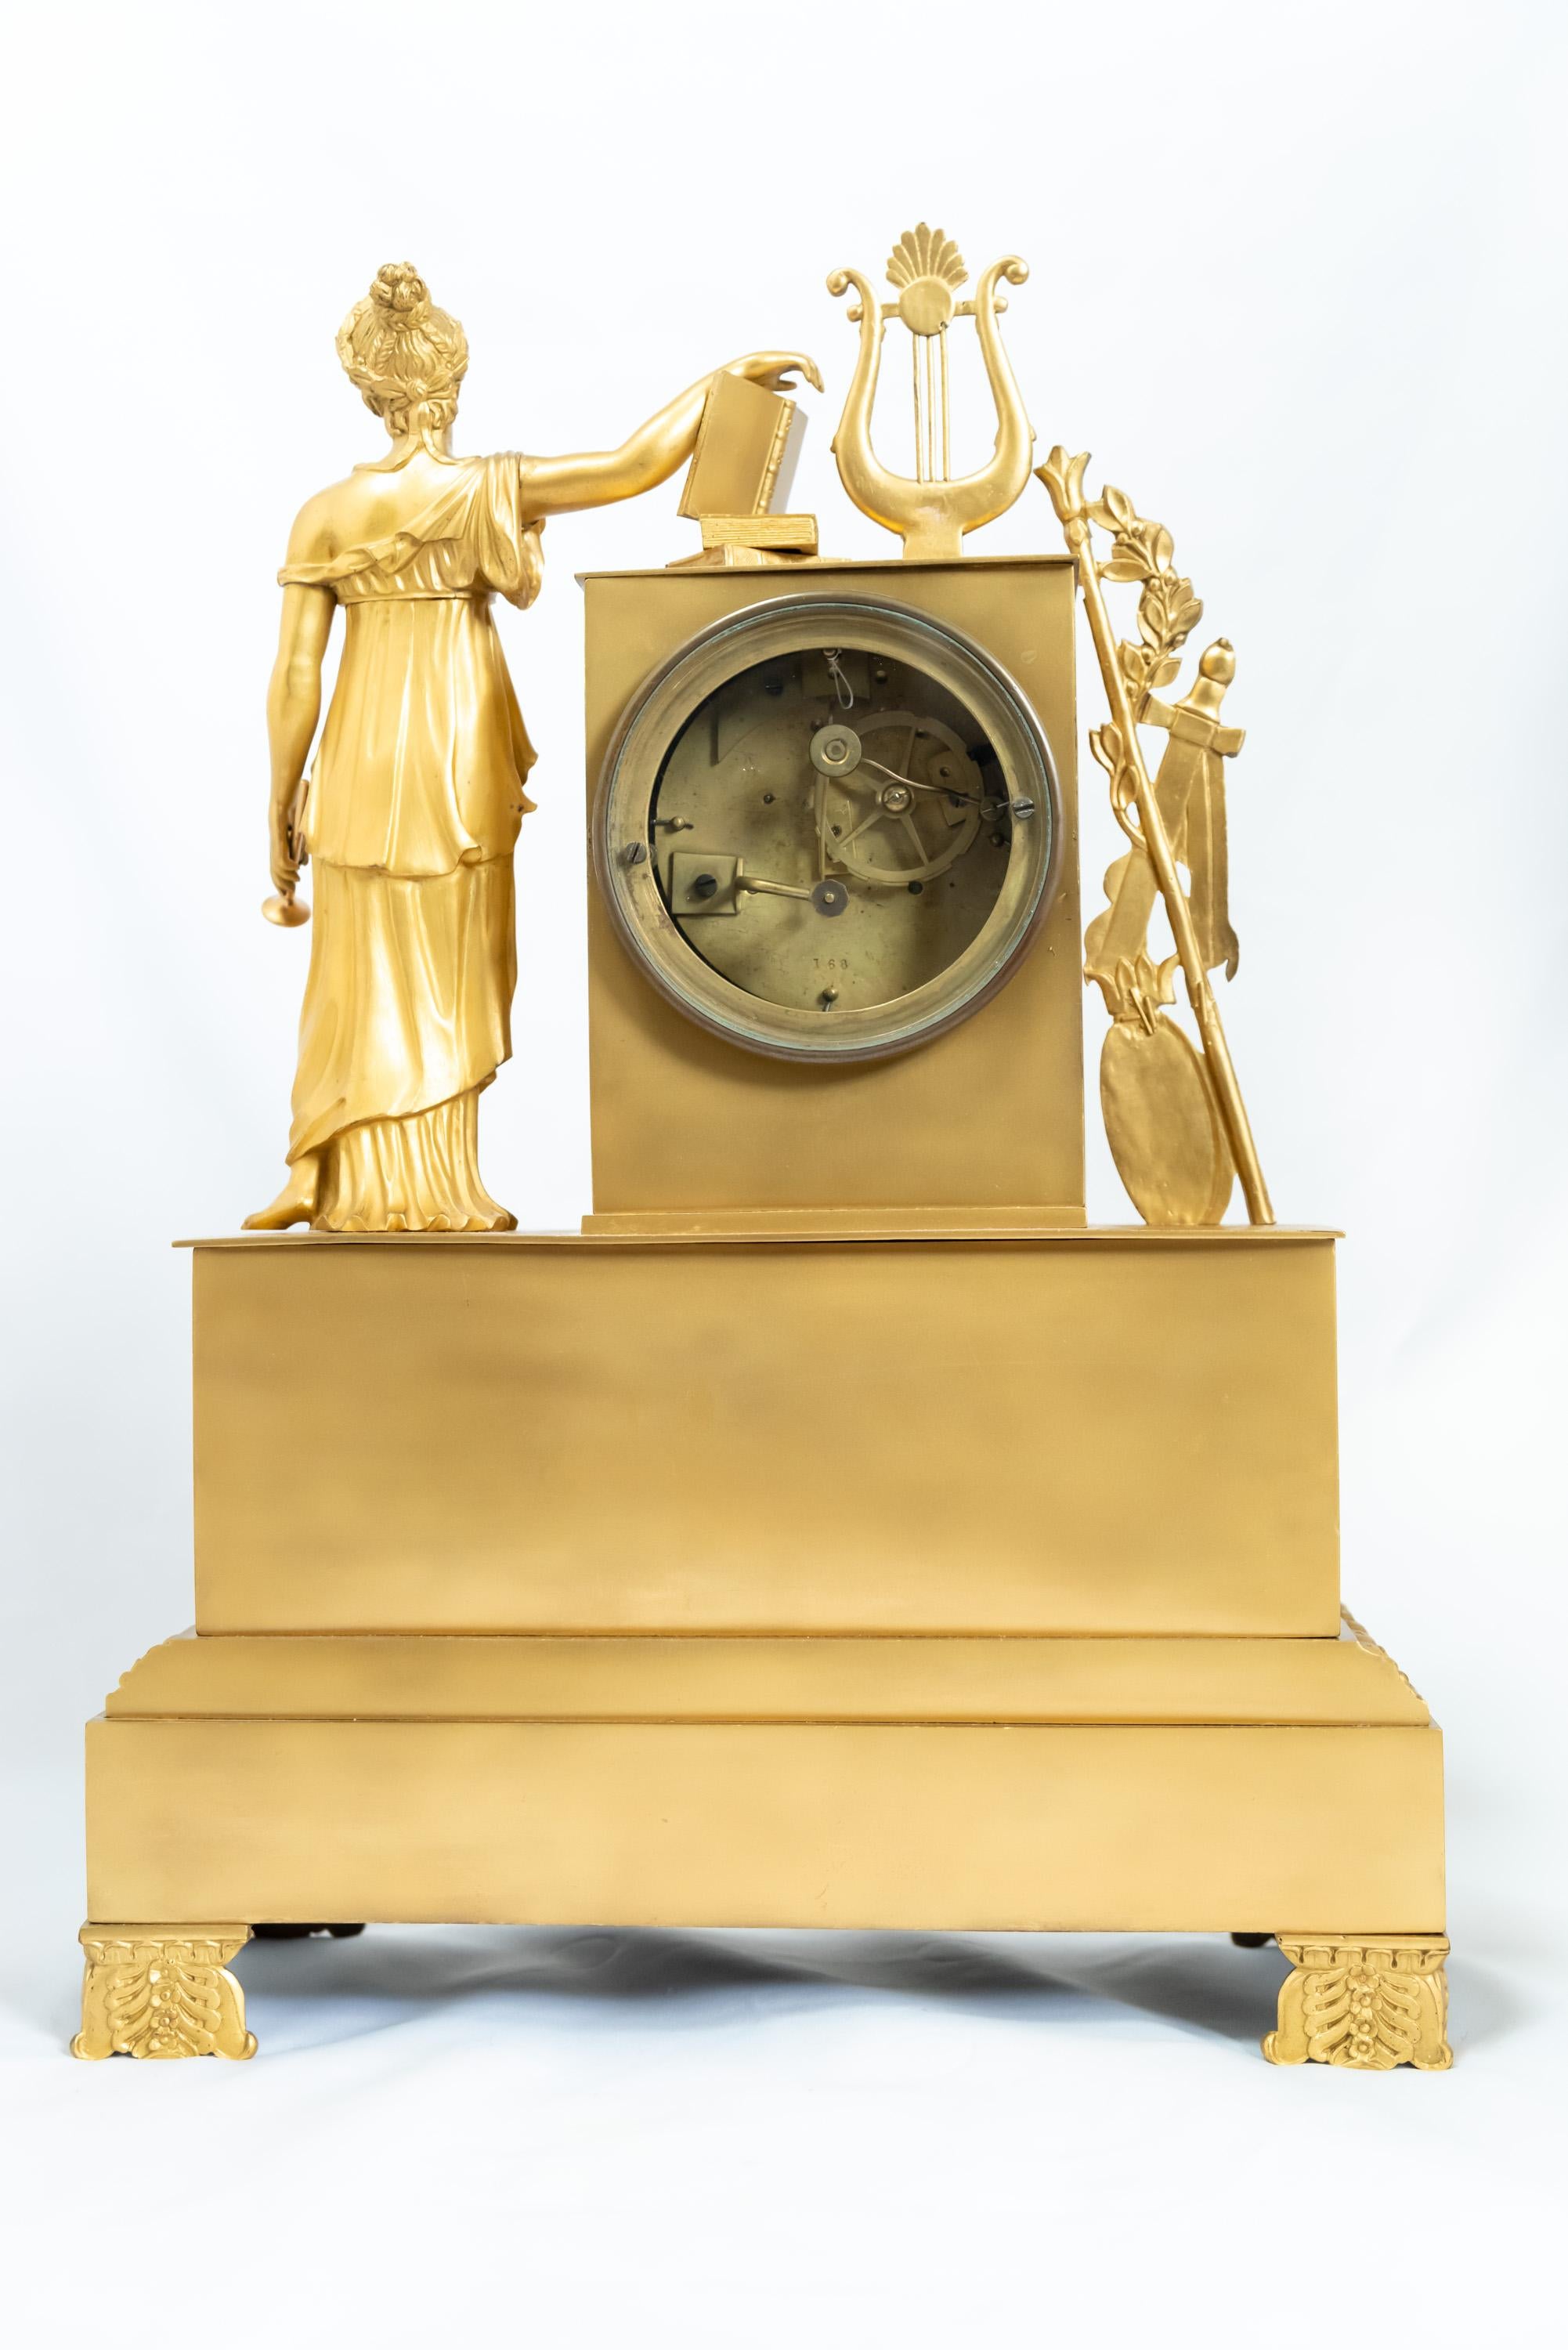 19th Century A Standing Figure French Restauration Era Fire-Gilt Clock For Sale